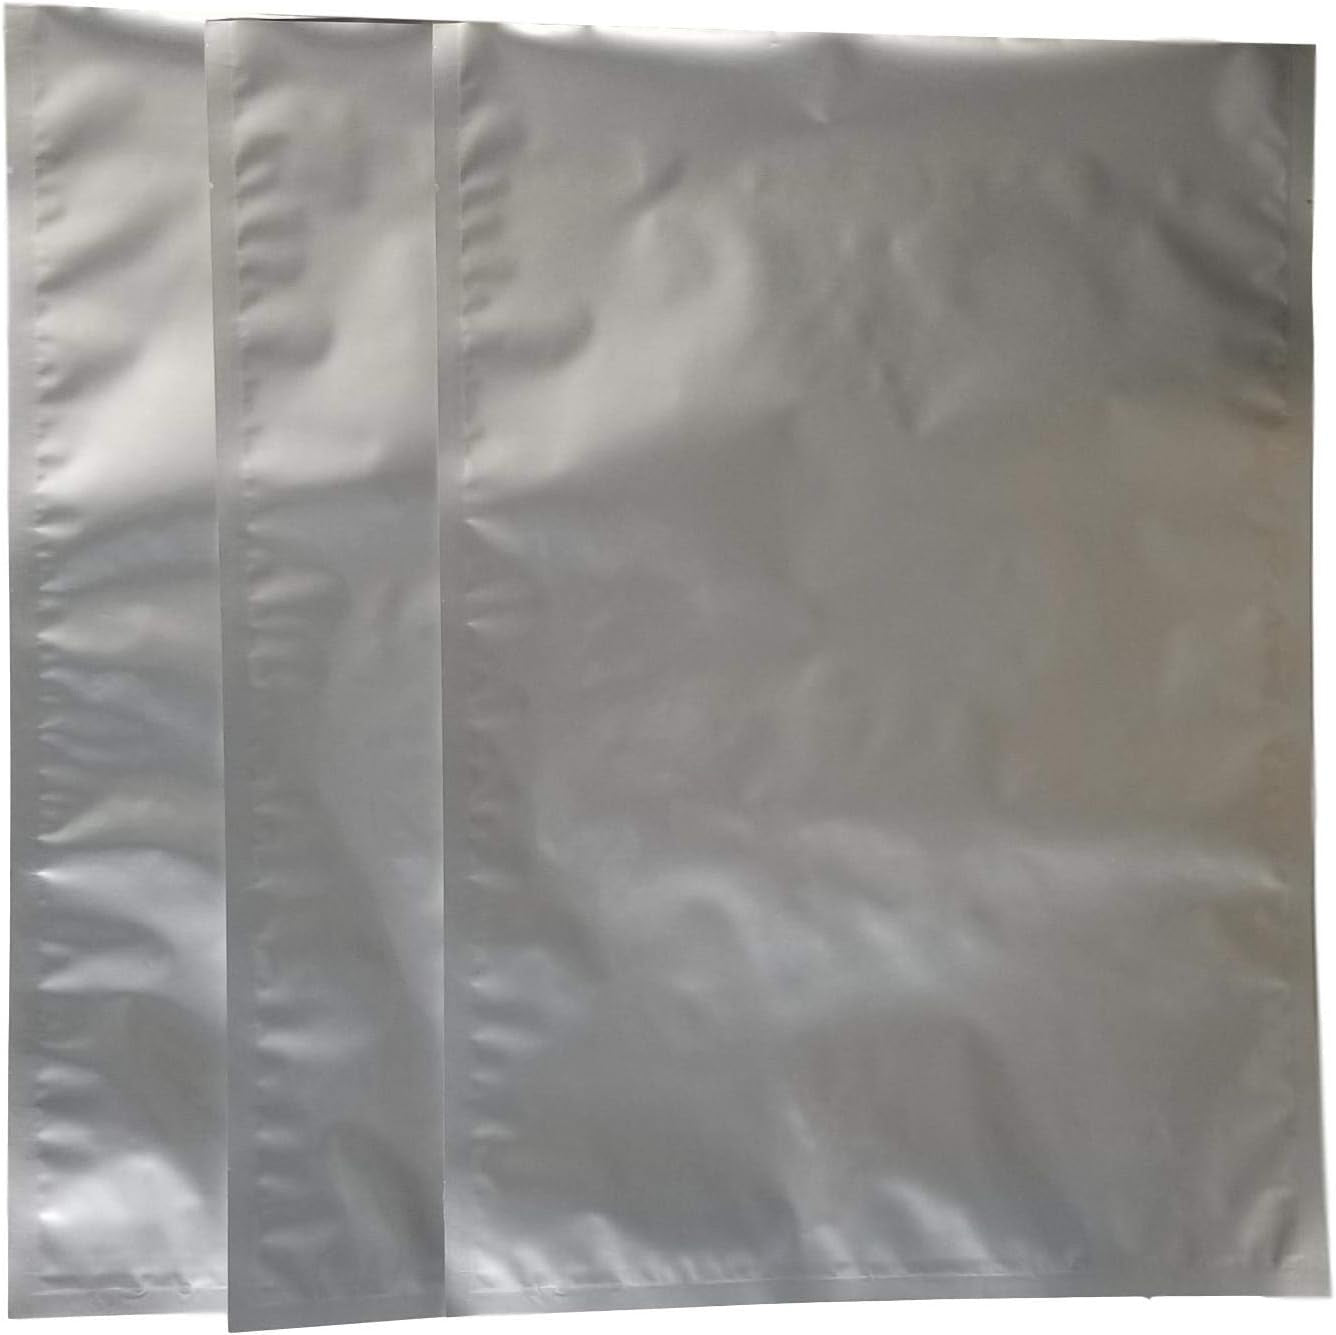 (50) - 2 Gallon Shieldpro (14"X20") 5 Mil Thick Mylar Bags for Long Term Emergency Food Storage Supply Disposable Food Storage Food Storage Bags Health & Household Household Supplies Paper & Plastic